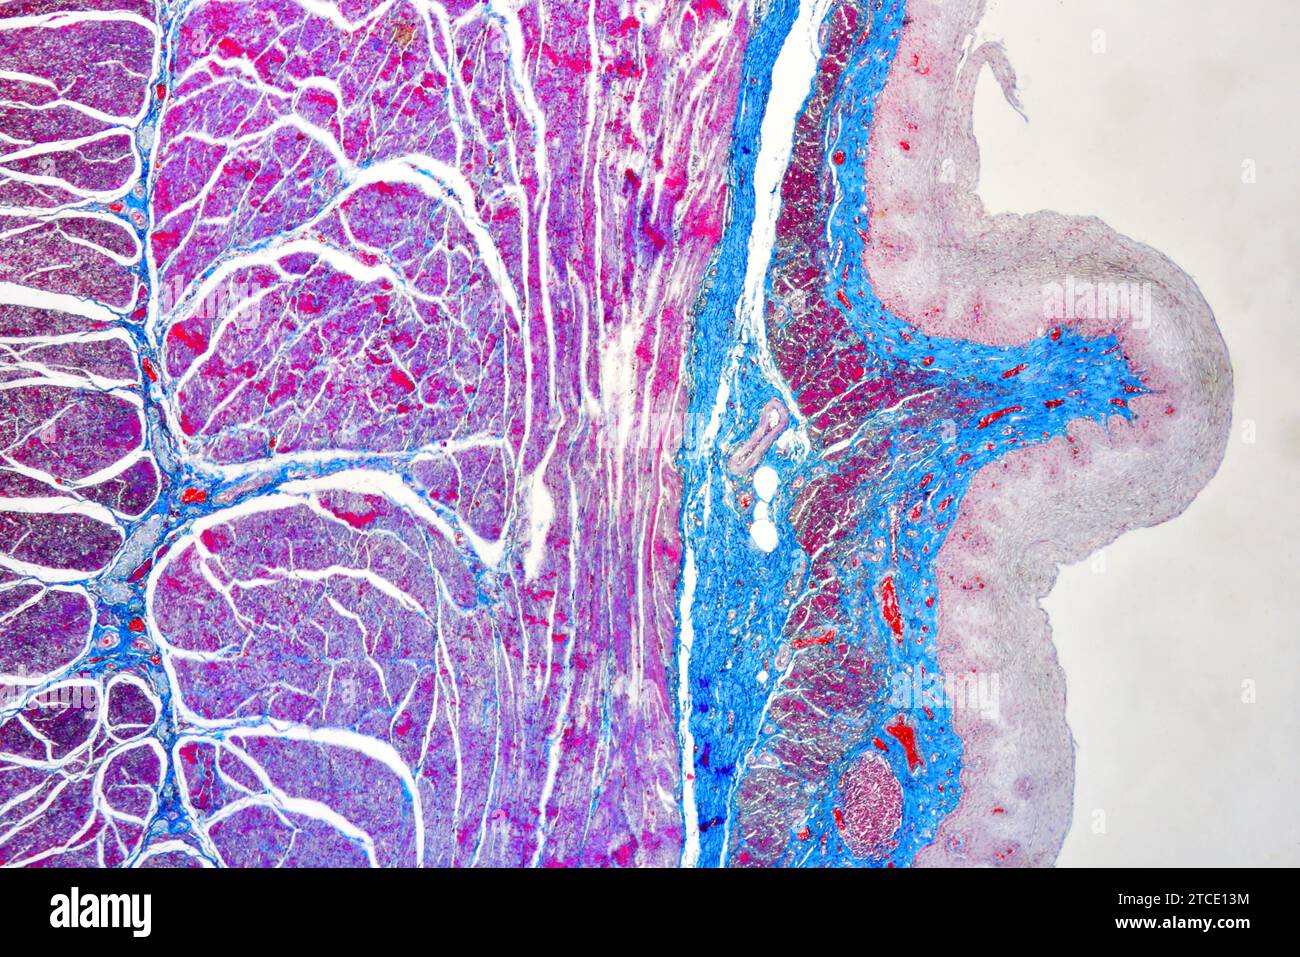 Human esophagus or oesophagus showing squamous epithelium stratified, vessels and muscular layers. Optical microscope X40. Stock Photo